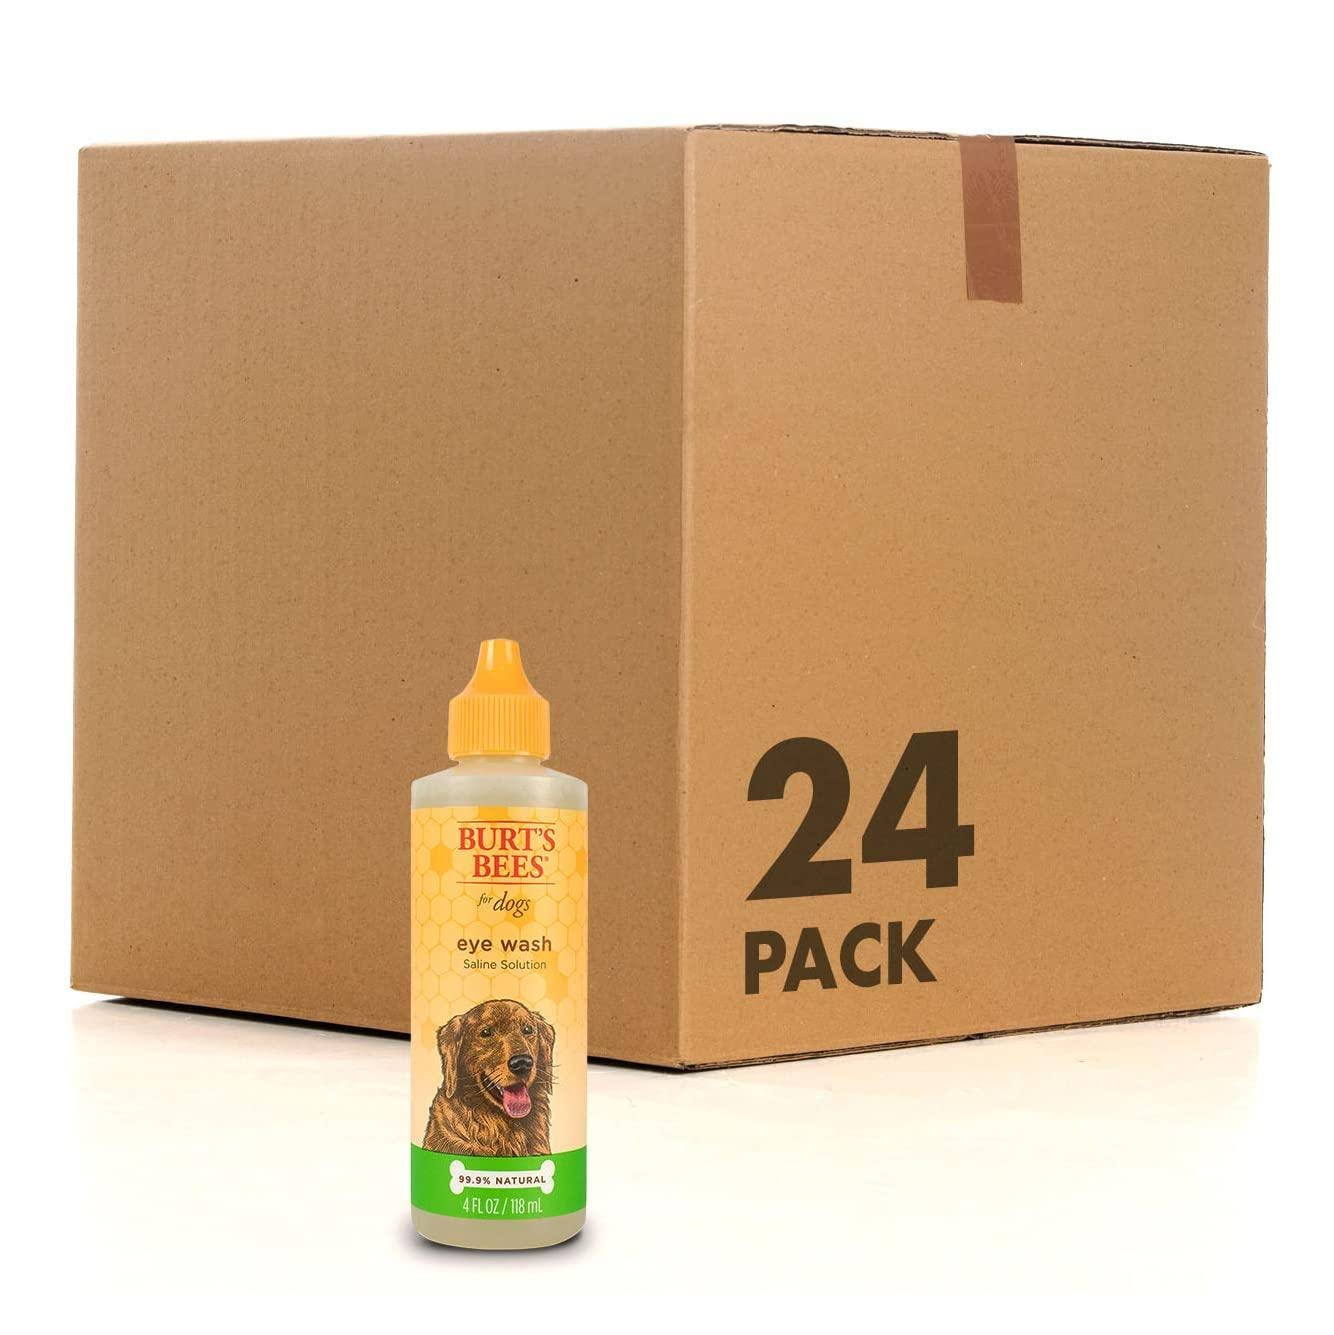 Burt's Bees for Pets Natural Dog Eye Wash with Saline Solution | Image